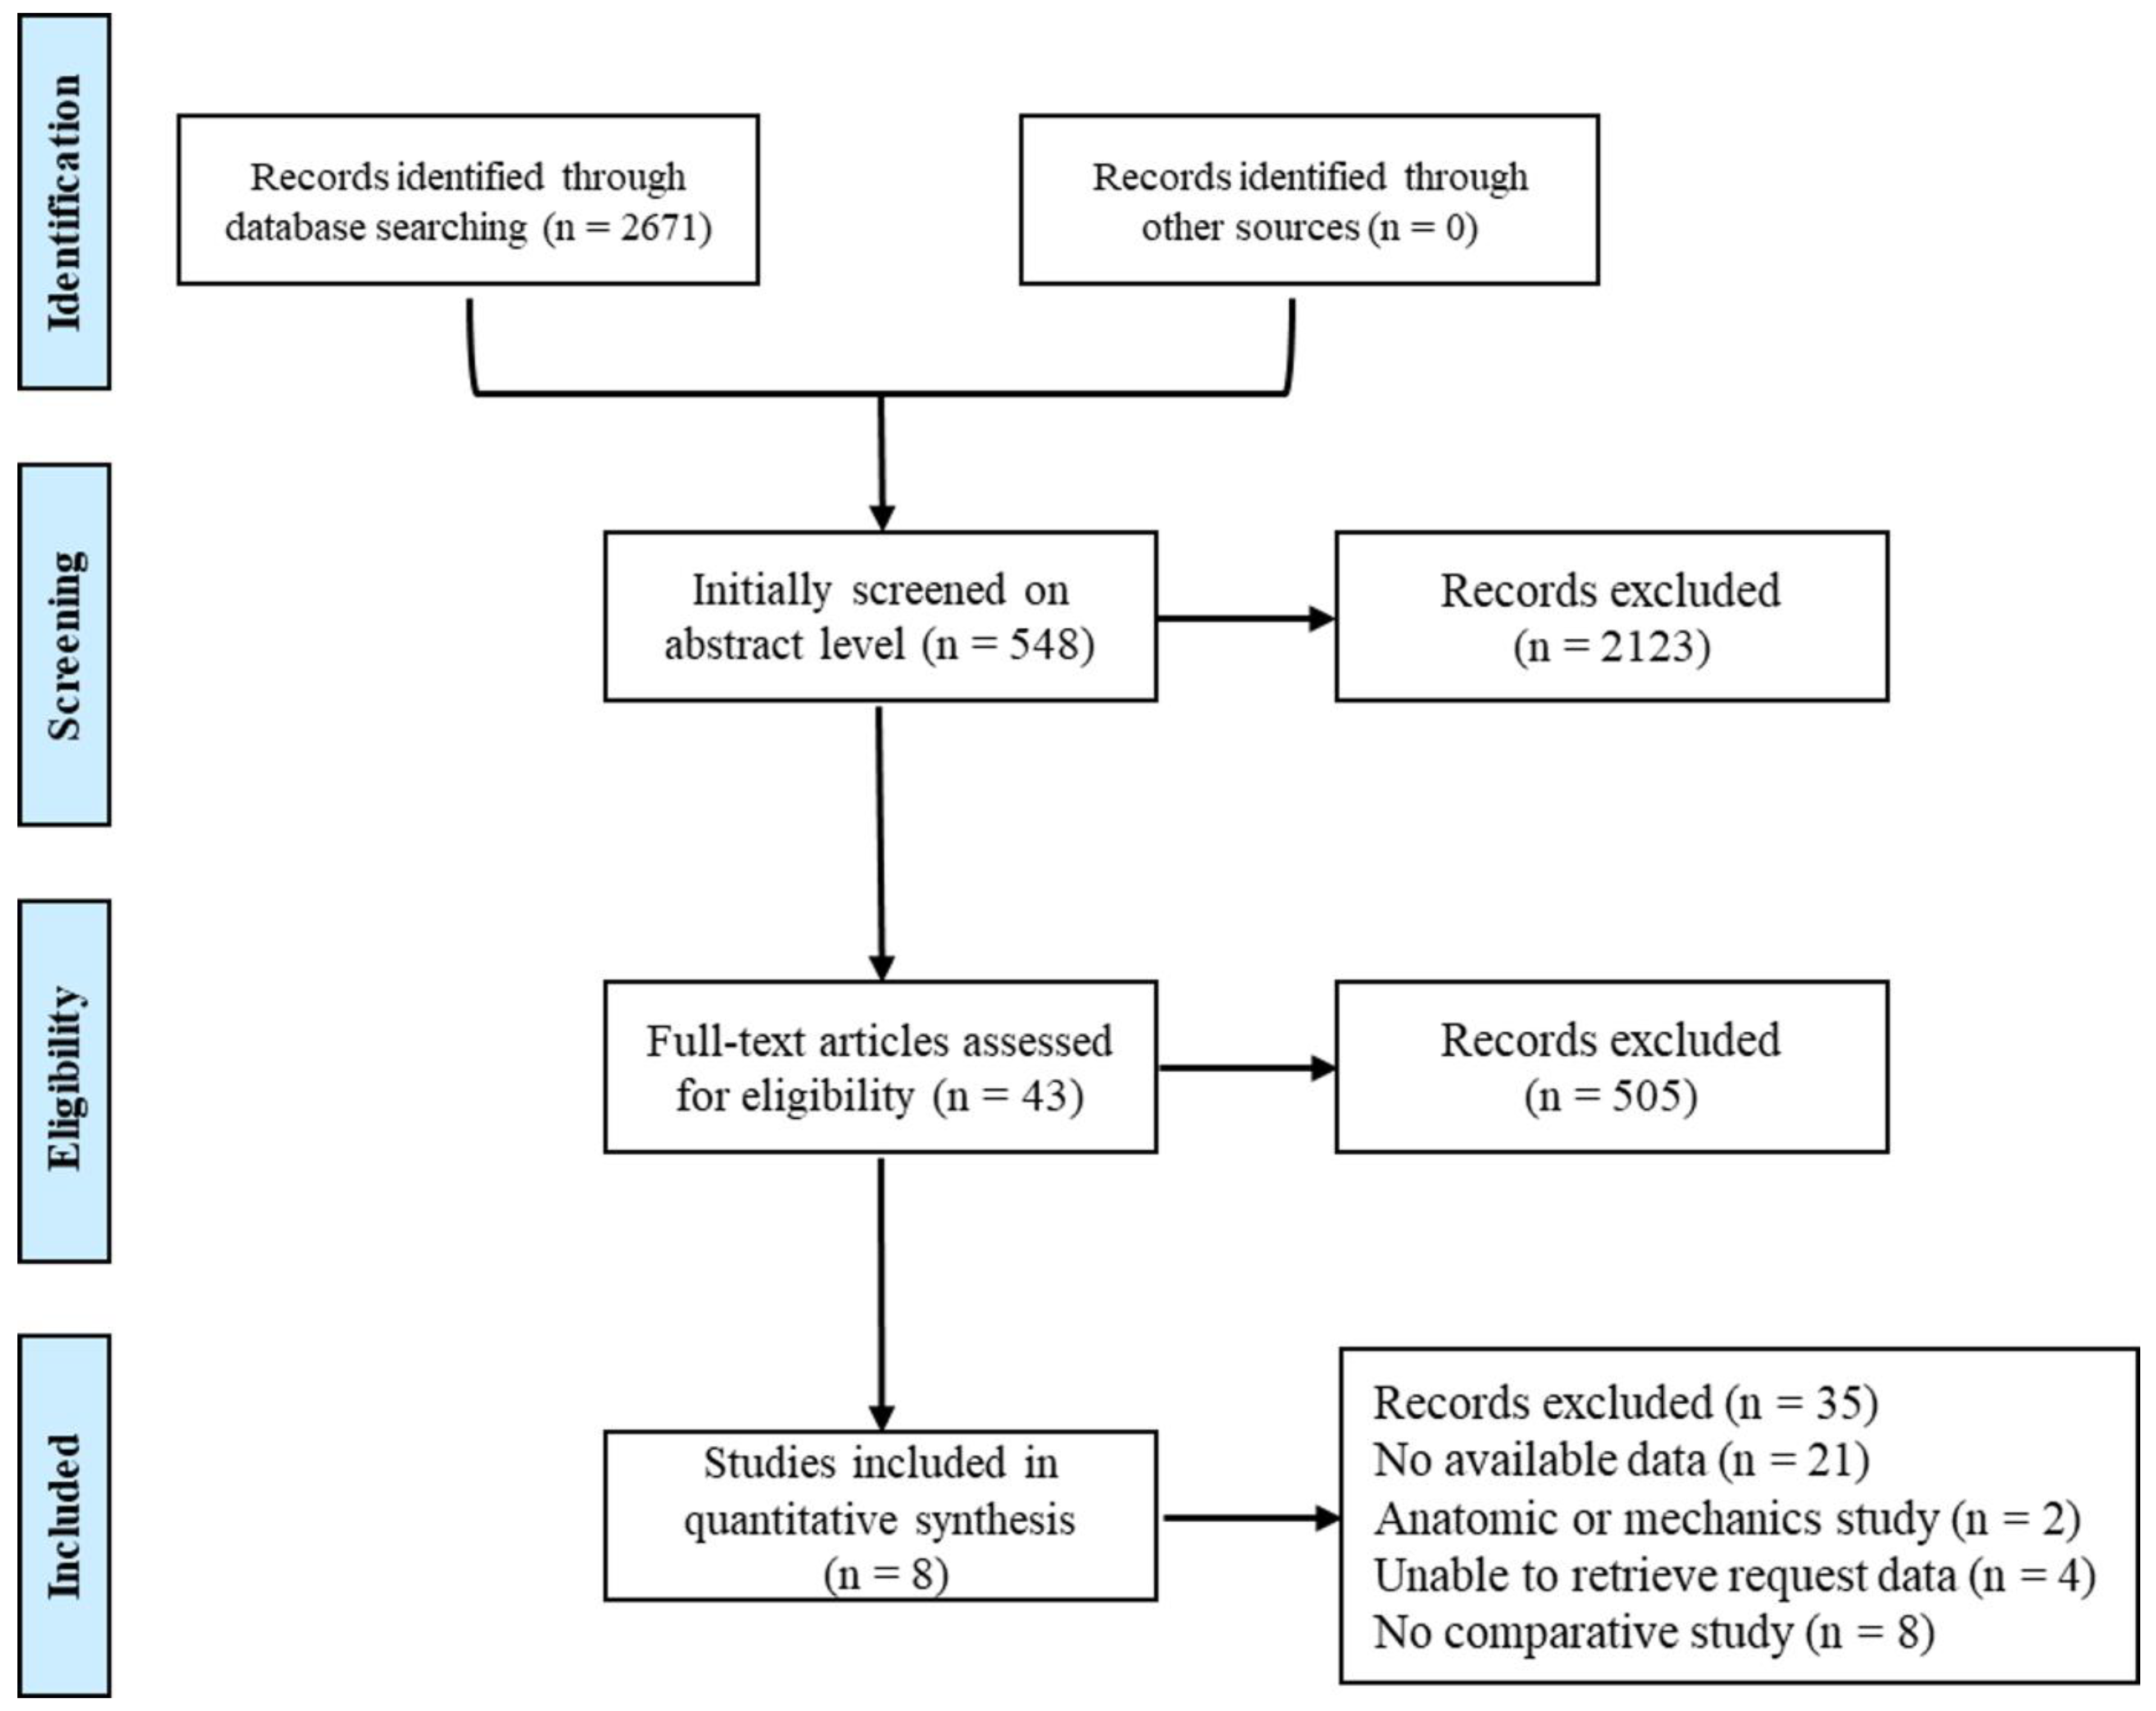 Weight-bearing or non-weight-bearing after surgical treatment of ankle  fractures: a multicenter randomized controlled trial